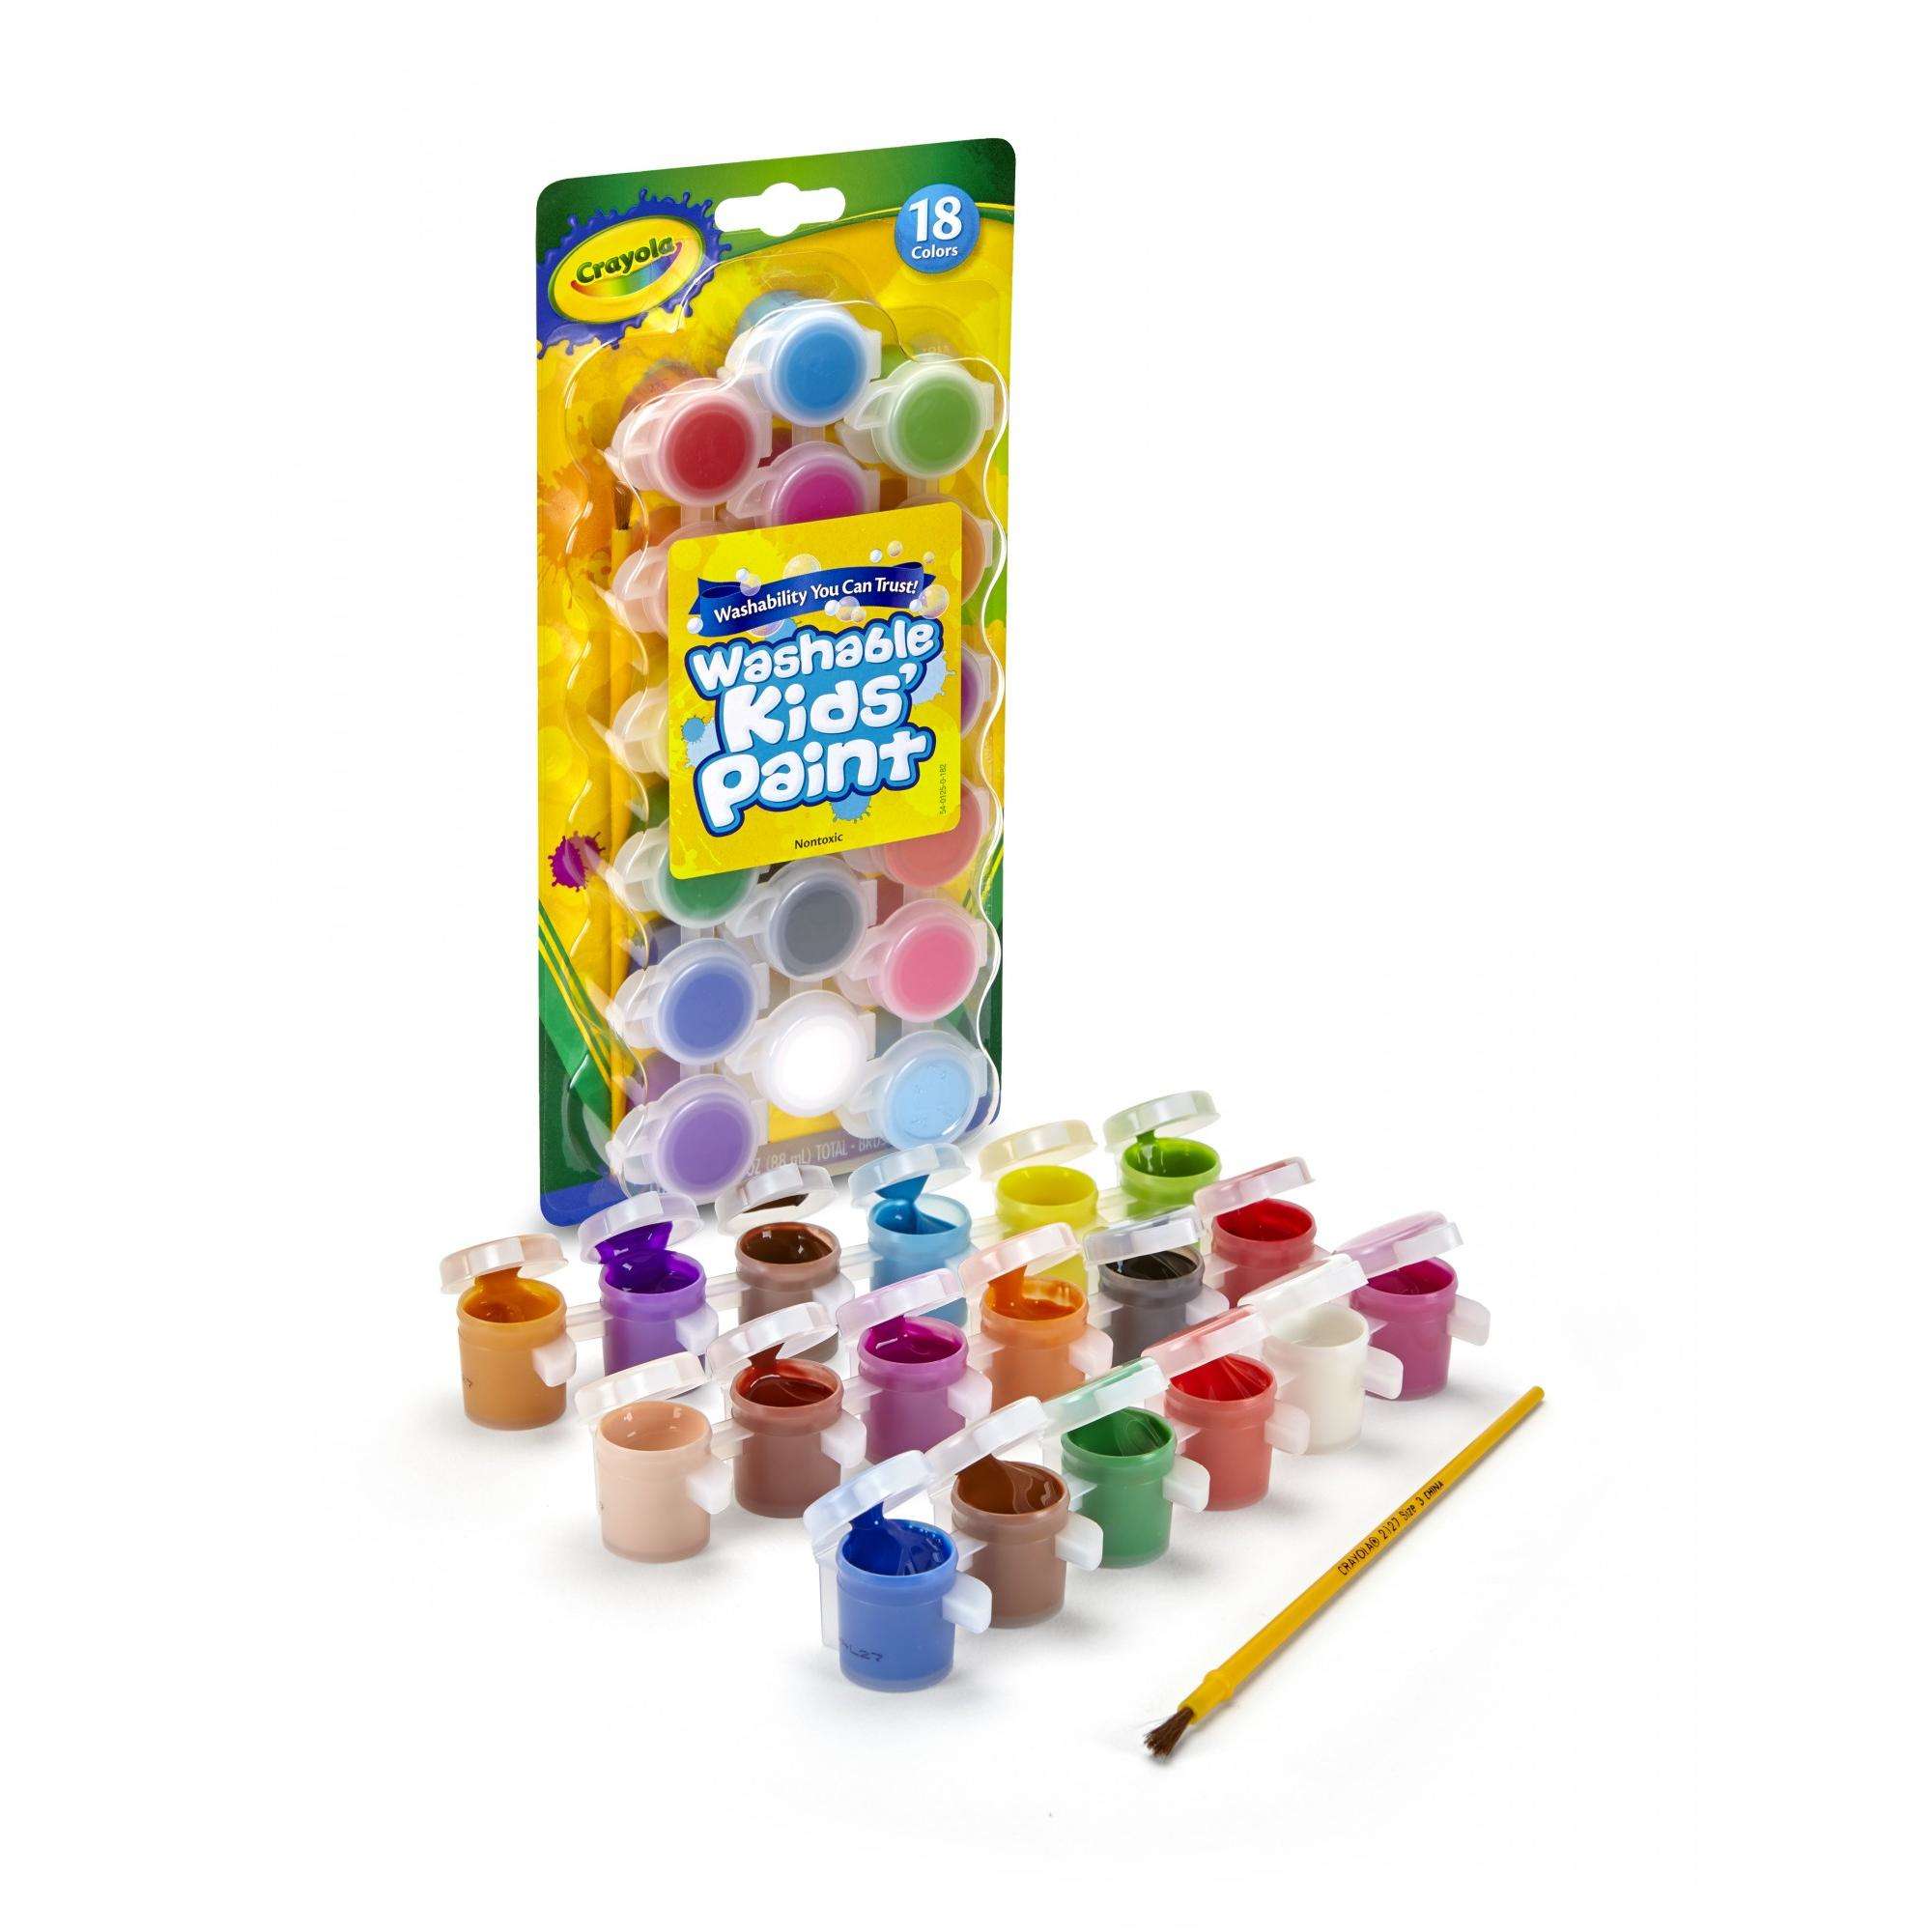 Crayola Washable Kids Paint Set, 18 Assorted Colors, Craft Supplies, Gift For Kids - image 1 of 11